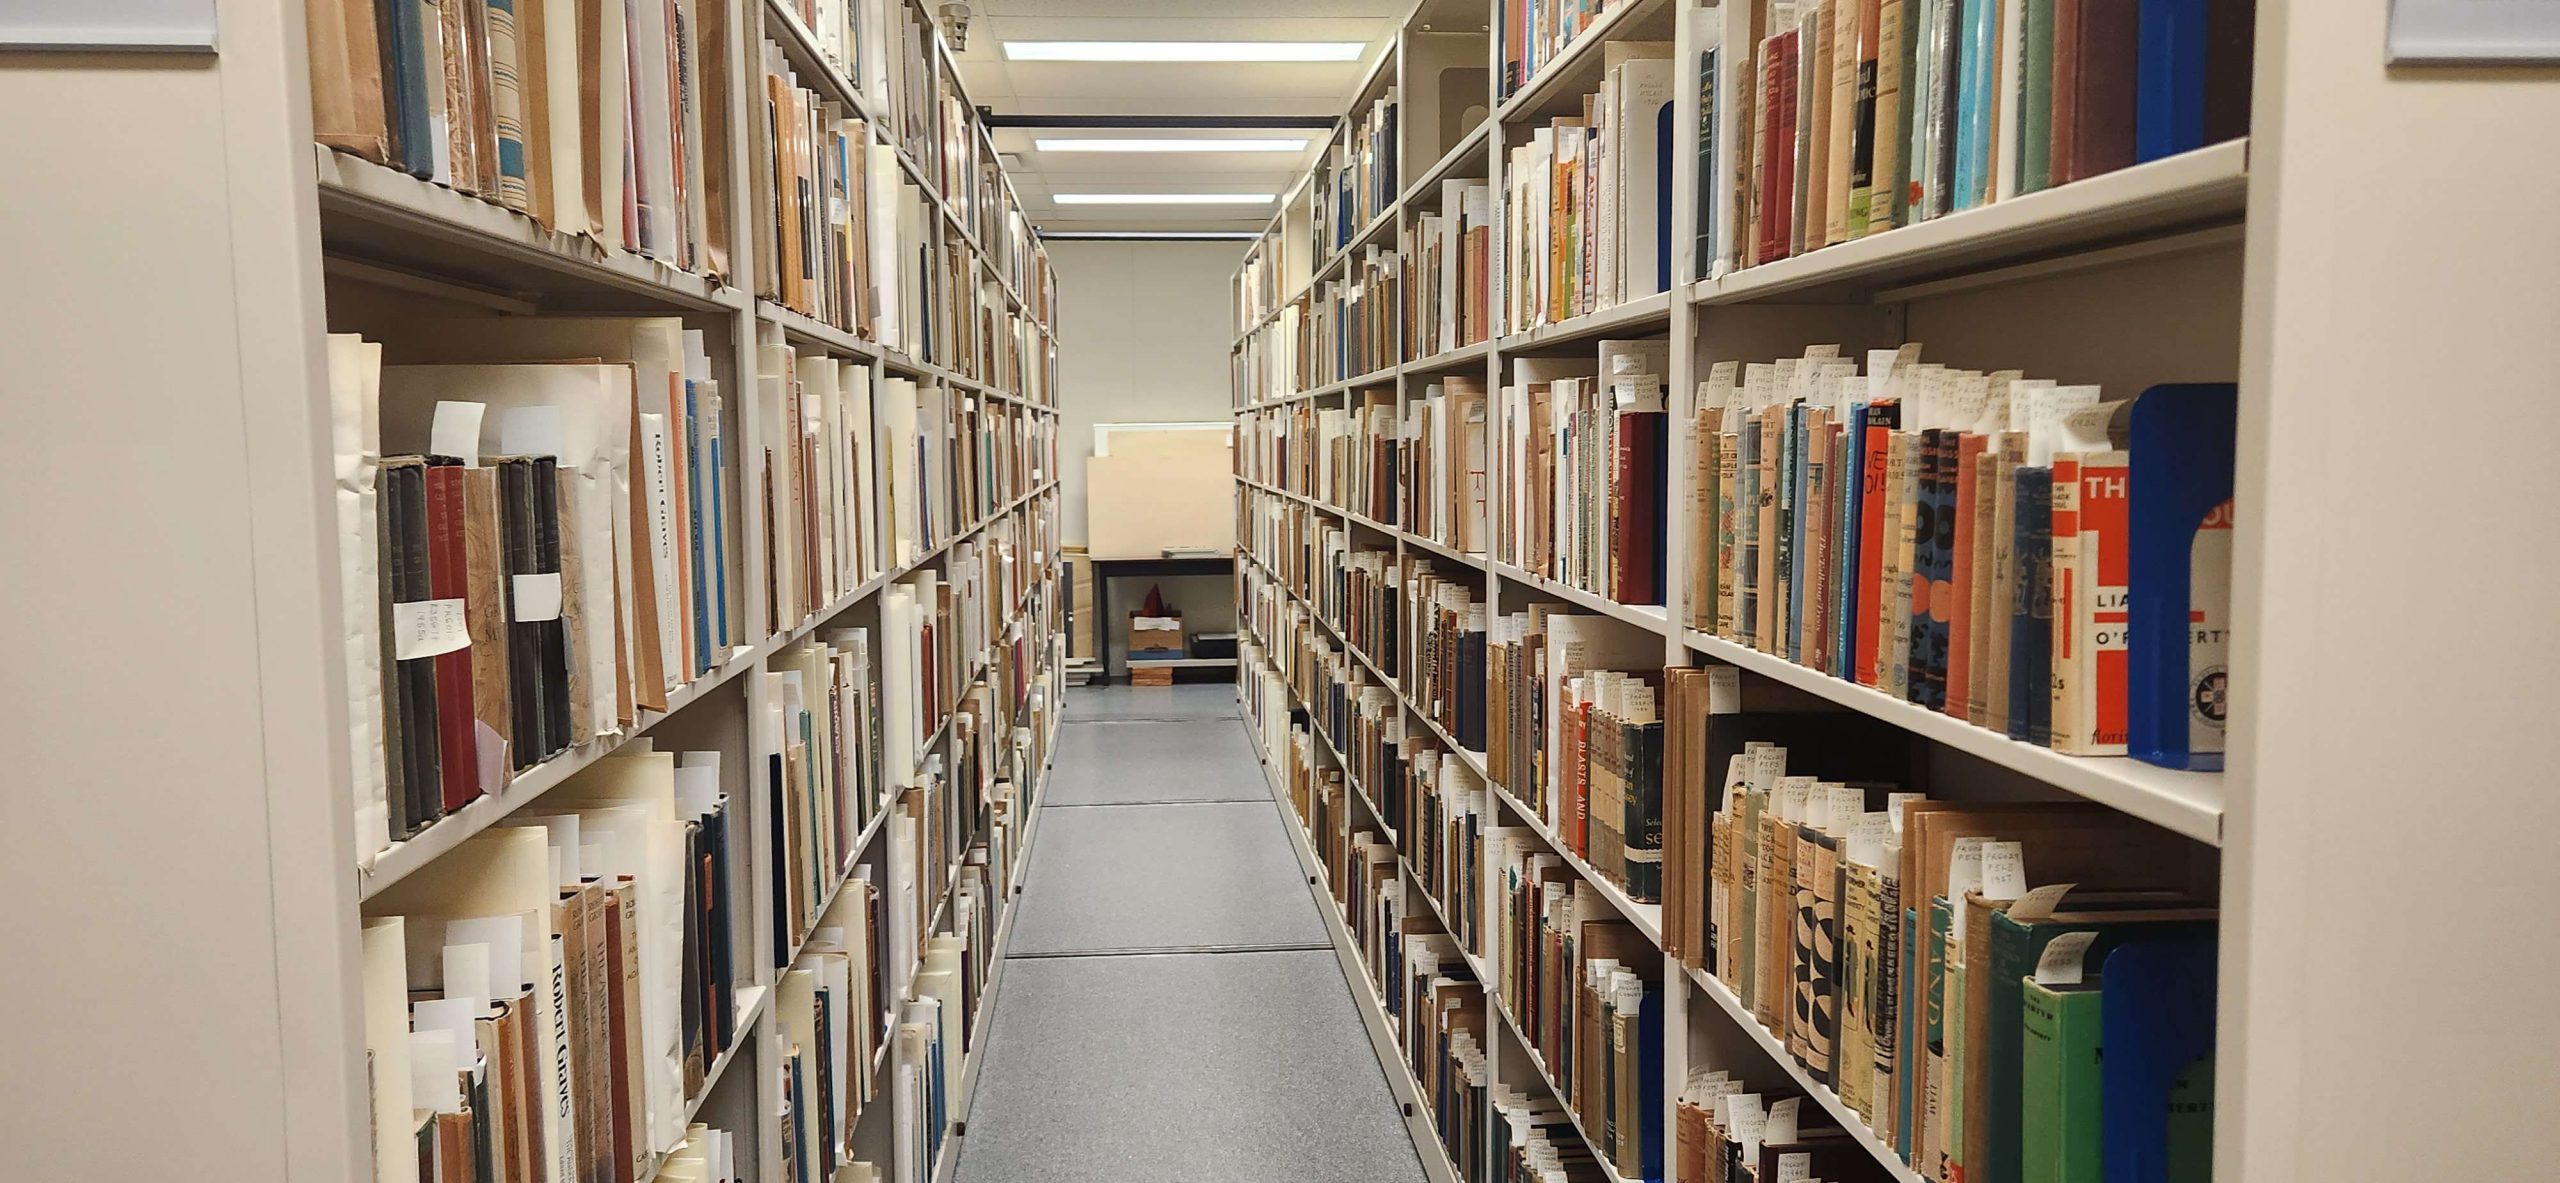 UVic’s Special Collections and University Archives